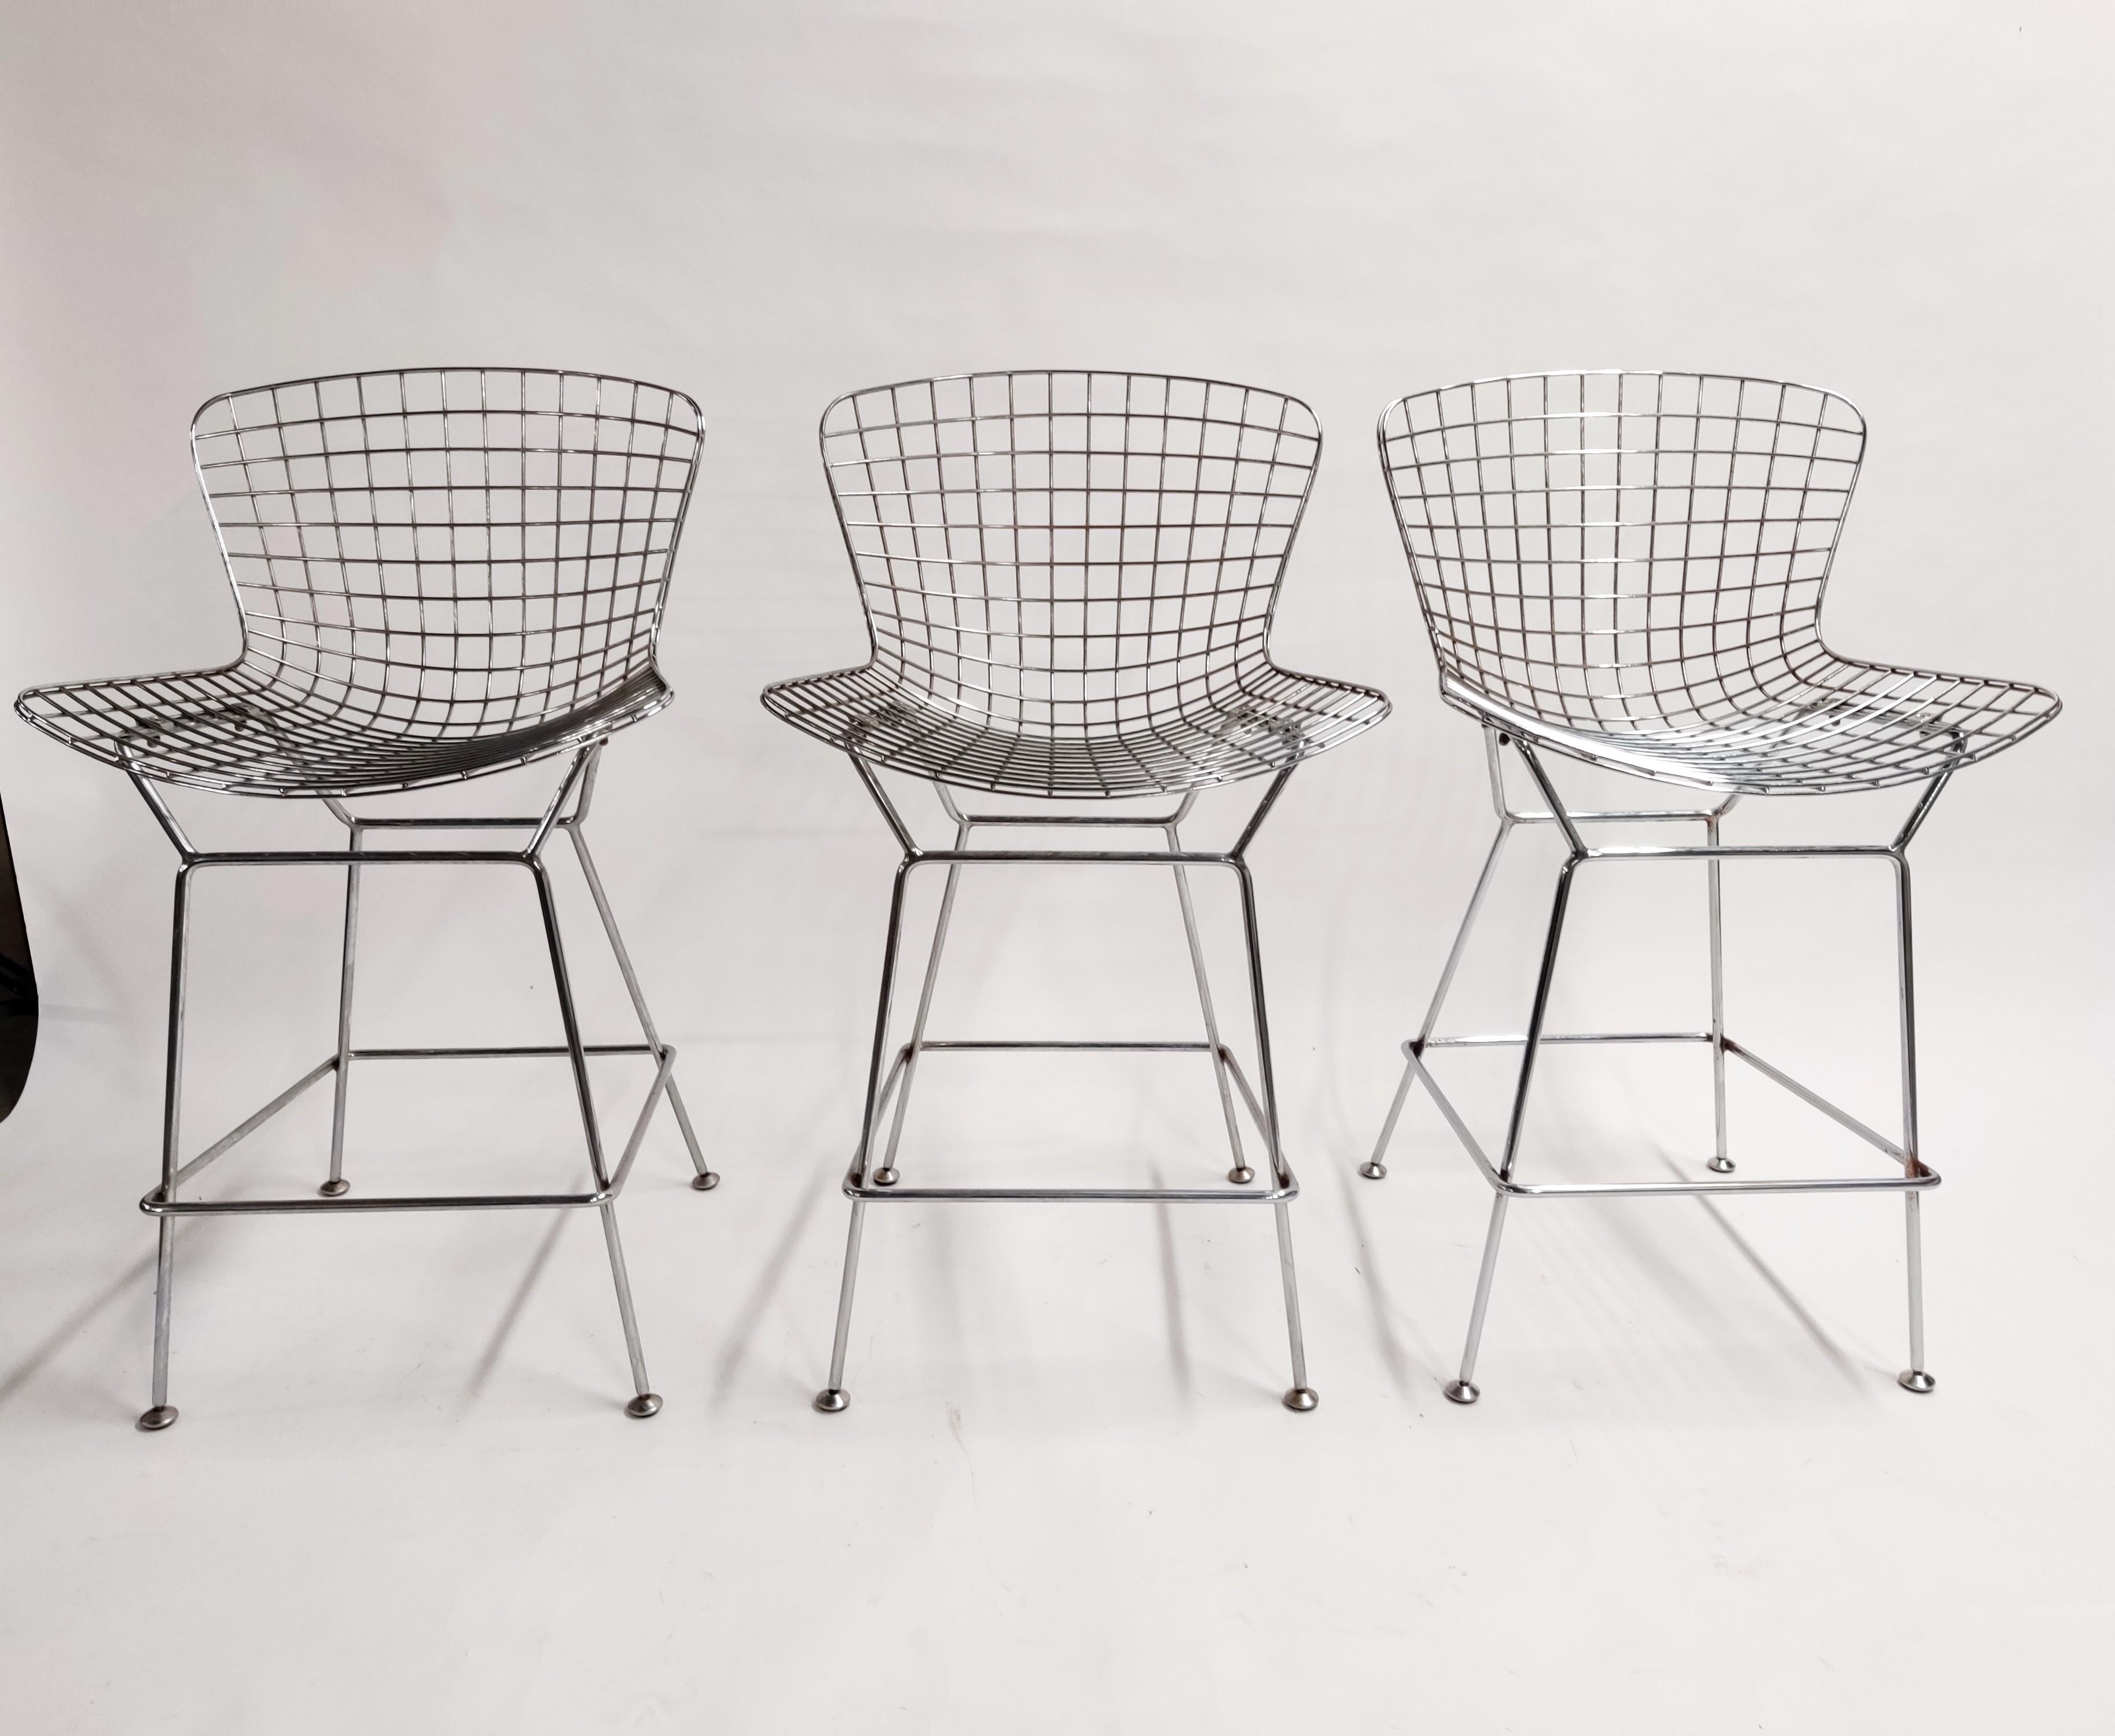 Set of 3 chrome wire bar stools in the style of Bertoia.

These are vintage examples with a lovely patina.

They come with the original leather seat pads.

Beautiful timeless design.

A few design features tell us this aren't knoll